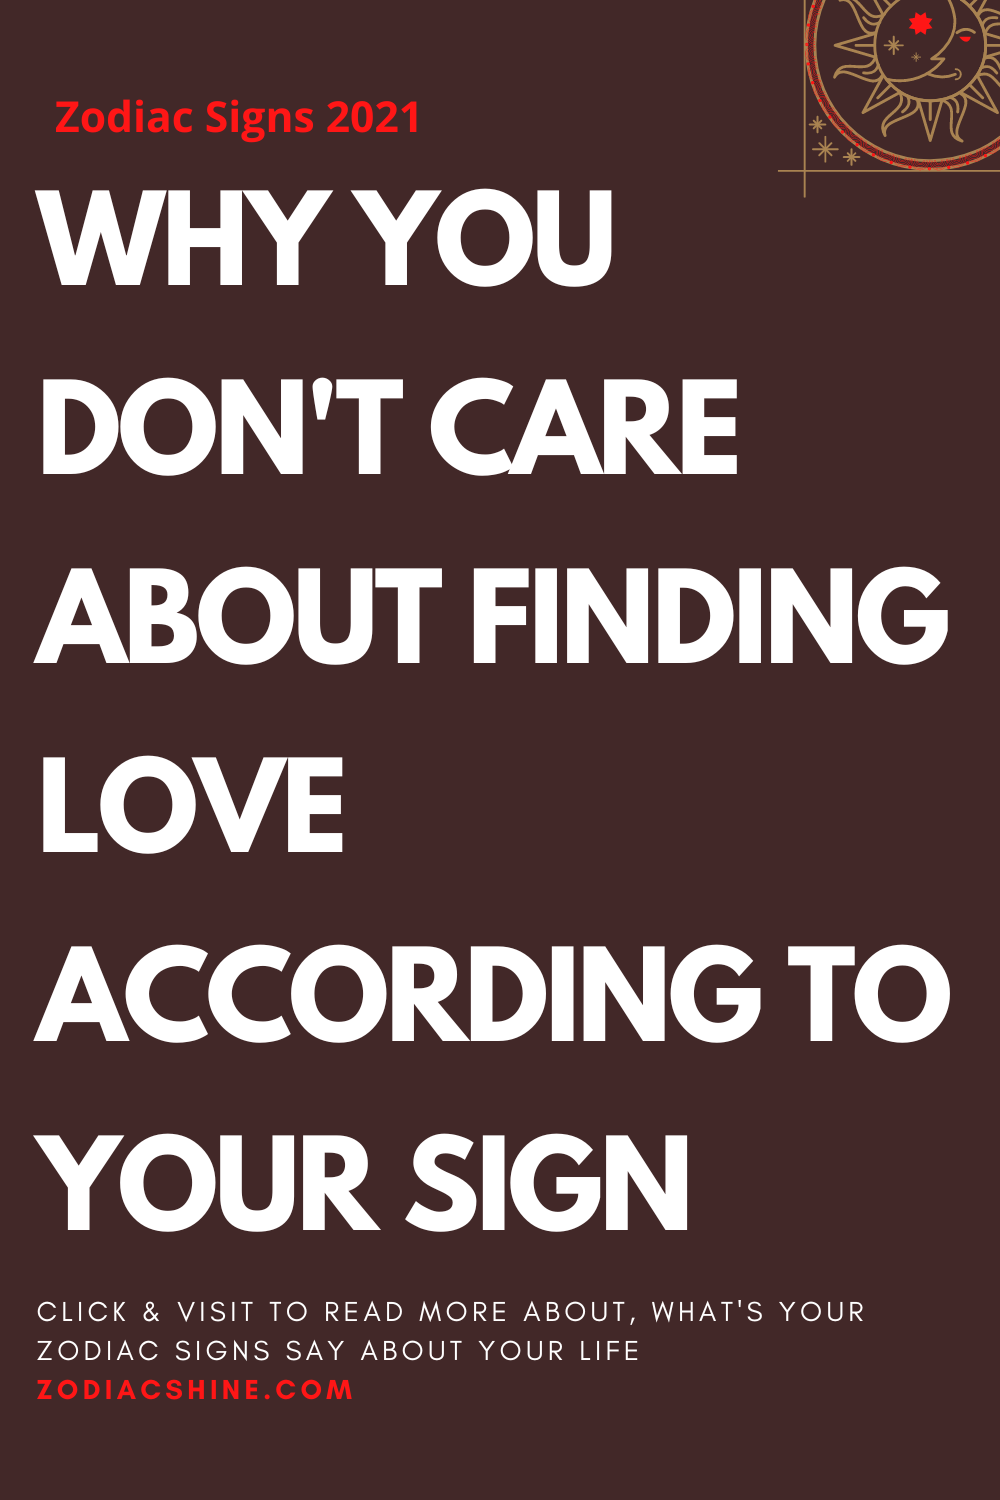 WHY YOU DON'T CARE ABOUT FINDING LOVE ACCORDING TO YOUR SIGN